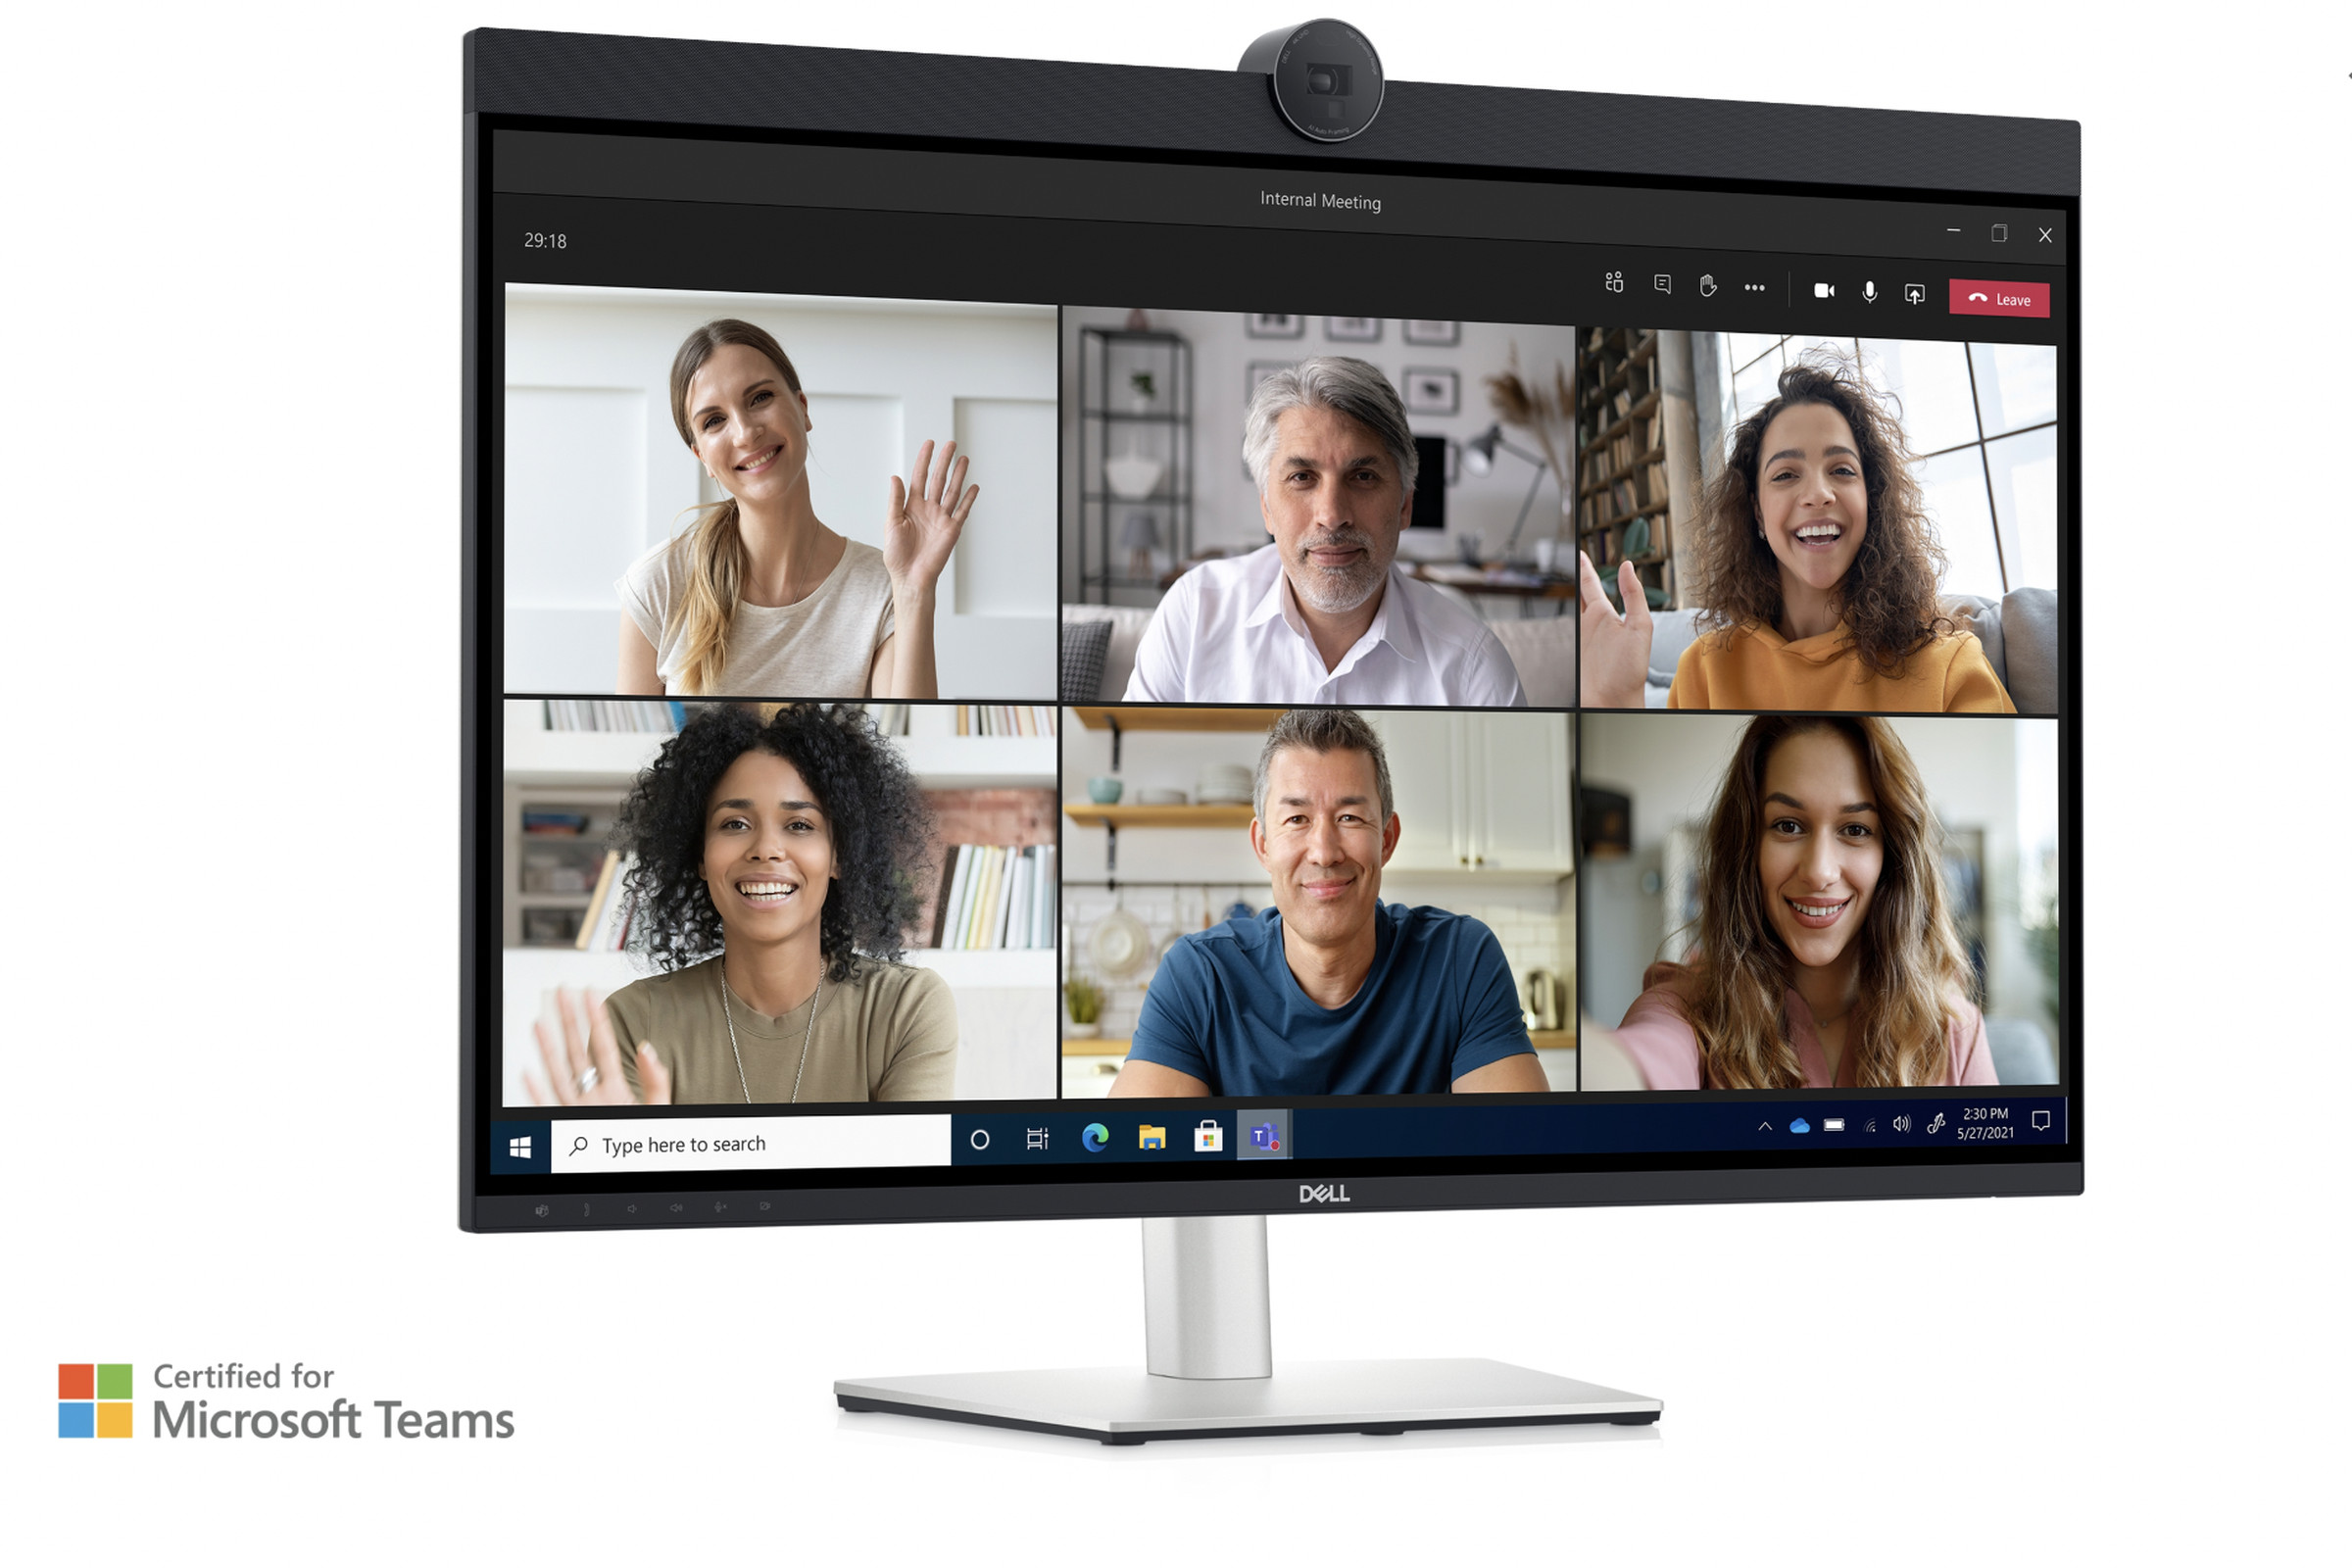 Dell’s 32-inch display comes with a focus on video calls.